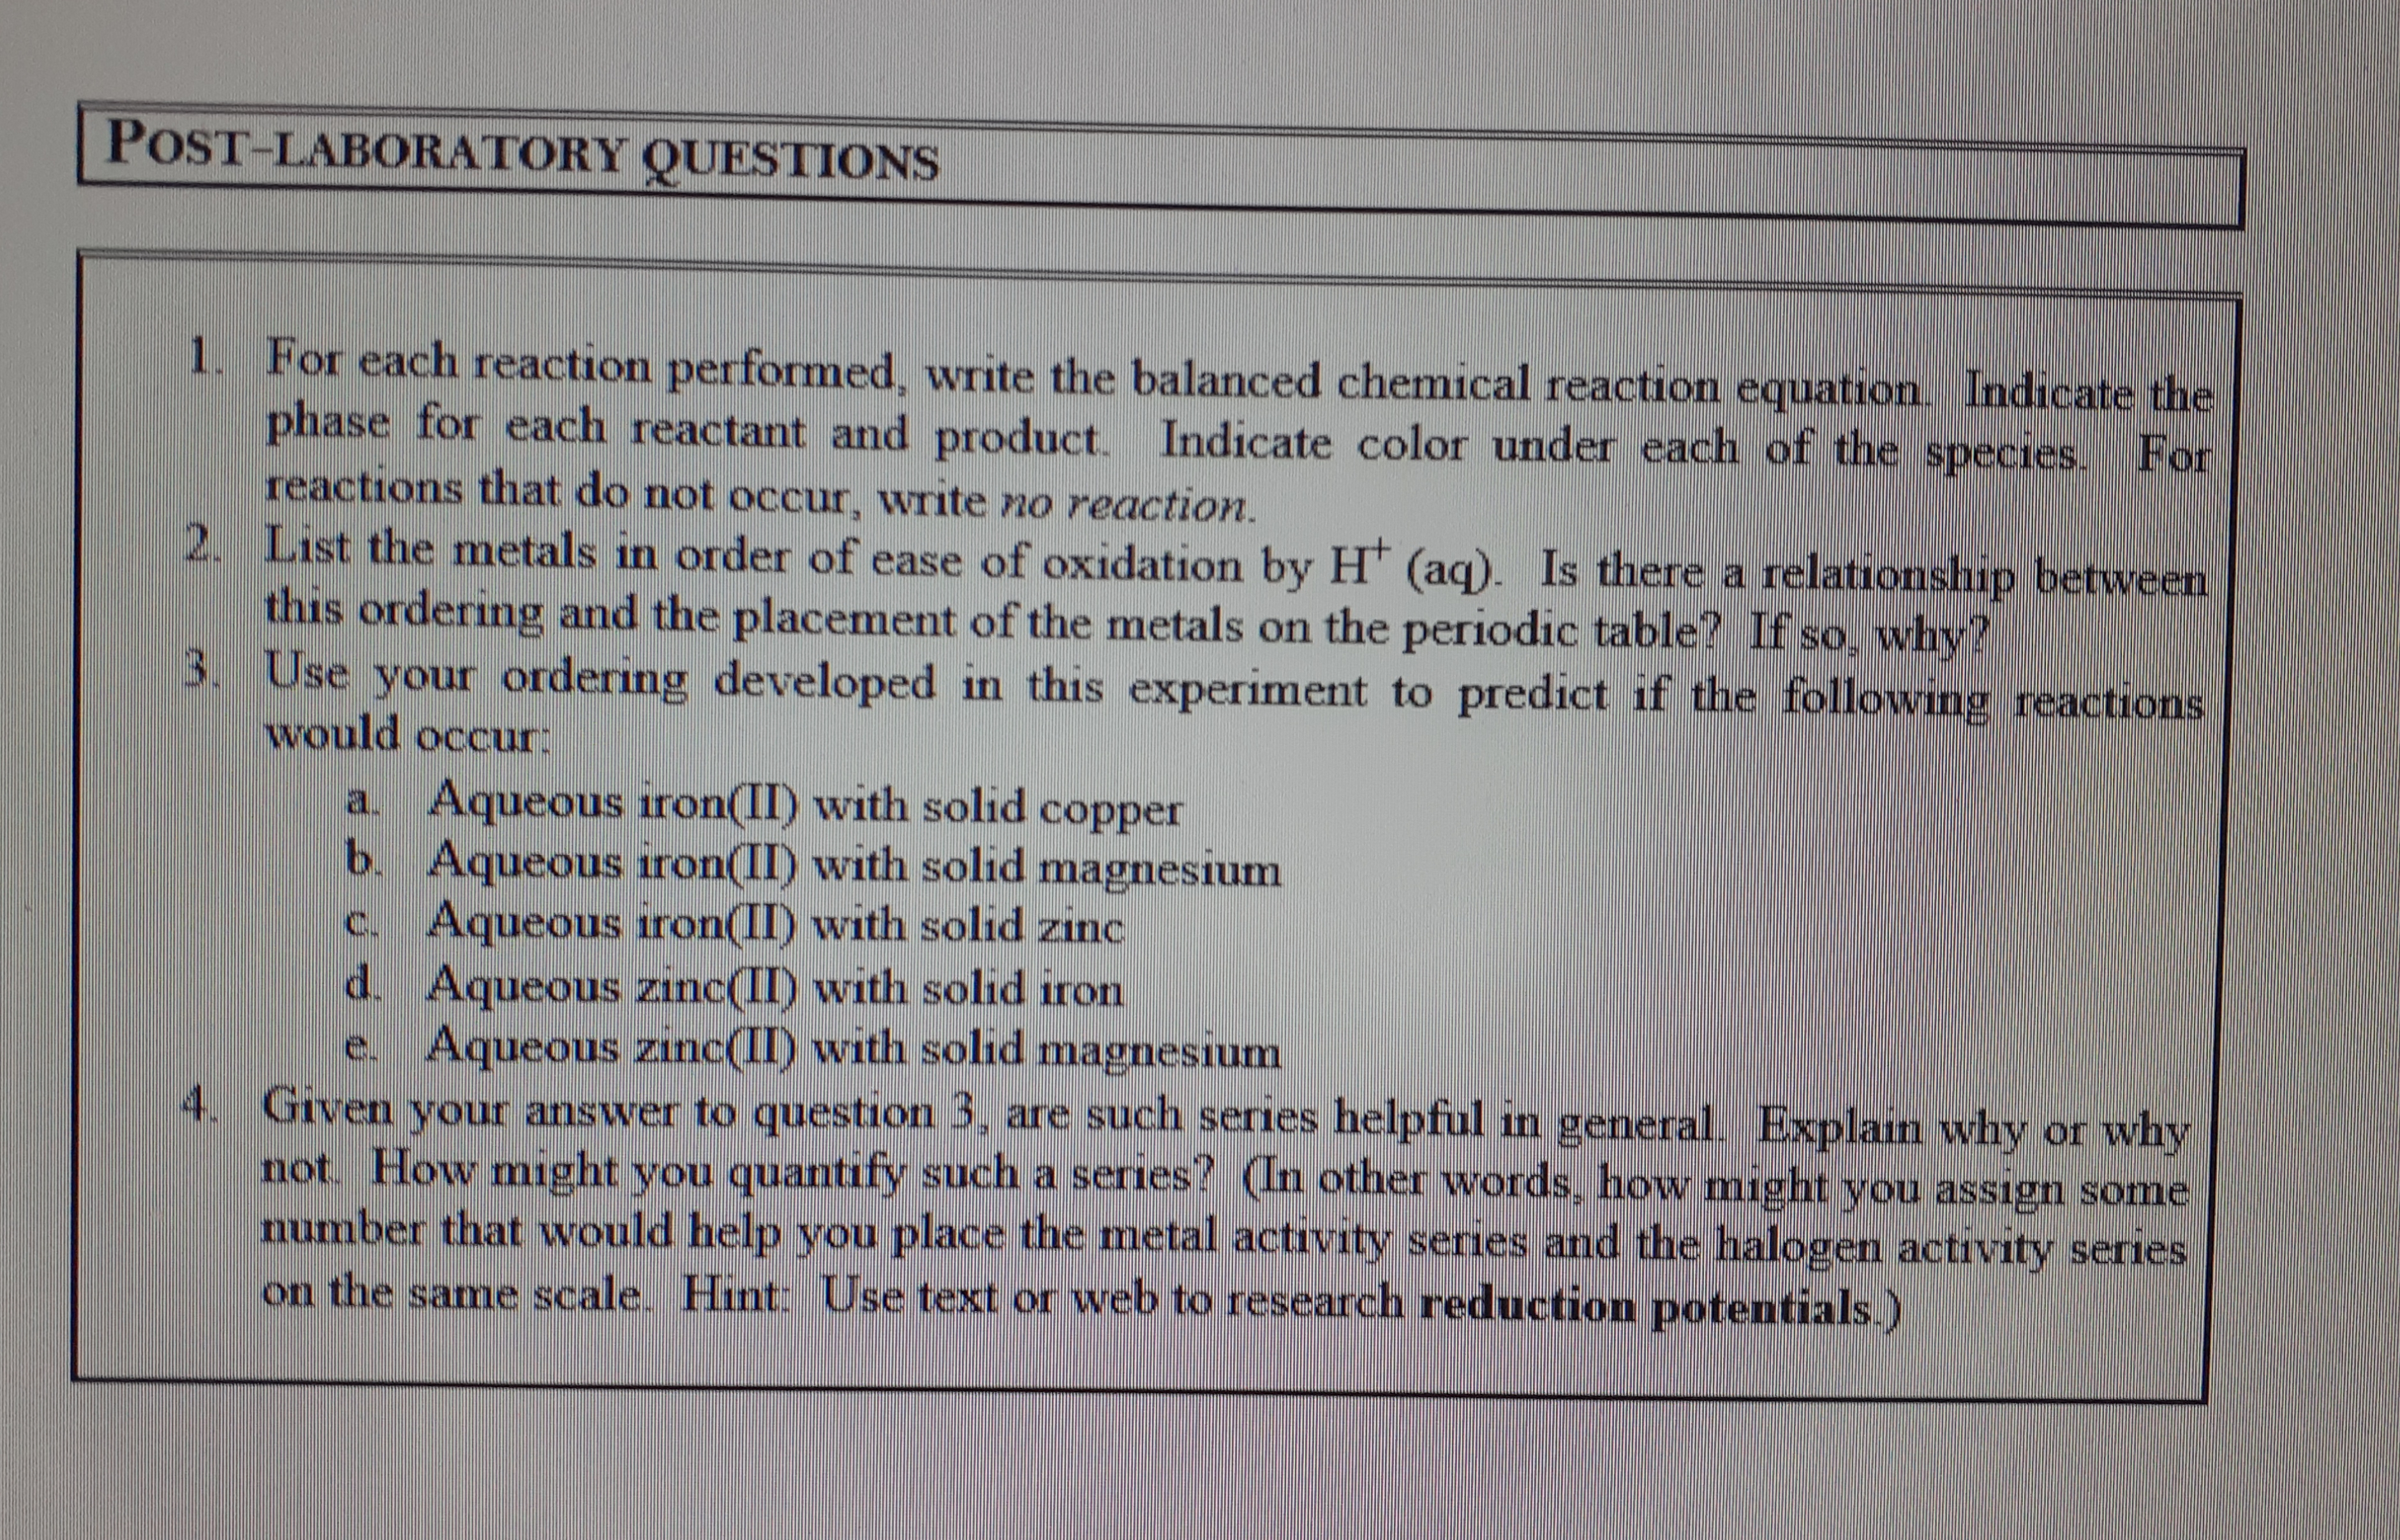 POST-LABORATORY QUESTIONS
1. For each reaction performed, write the balanced chemical reaction equation. Indicate the
phase for each reactant and product.
reactions that do not occur, write no reaction.
2. List the metals in order of ease of oxidation by H* (aq). Is there a relationship between
this ordering and the placement of the metals on the periodic table? If so, why?
3. Use your ordering developed in this experiment to predict if the following reactions
Indicate color under each of the species. For
would occur:
a. Aqueous iron(II) with solid copper
b. Aqueous iron(II) with solid magnesium
Aqueous iron(II) with solid zinc
d. Aqueous zinc(II) with solid iron
Aqueous zinc(II) with solıd magnesium
C.
4. Given your answer to question 3, are such series helpful in general. Explain why or why
not. How might you quantify such a series? (In other words, how might you assign some
number that would help you place the metal activity series and the halogen activity series
on the same scale. Hint: Use text or web to research reduction potentials.)
